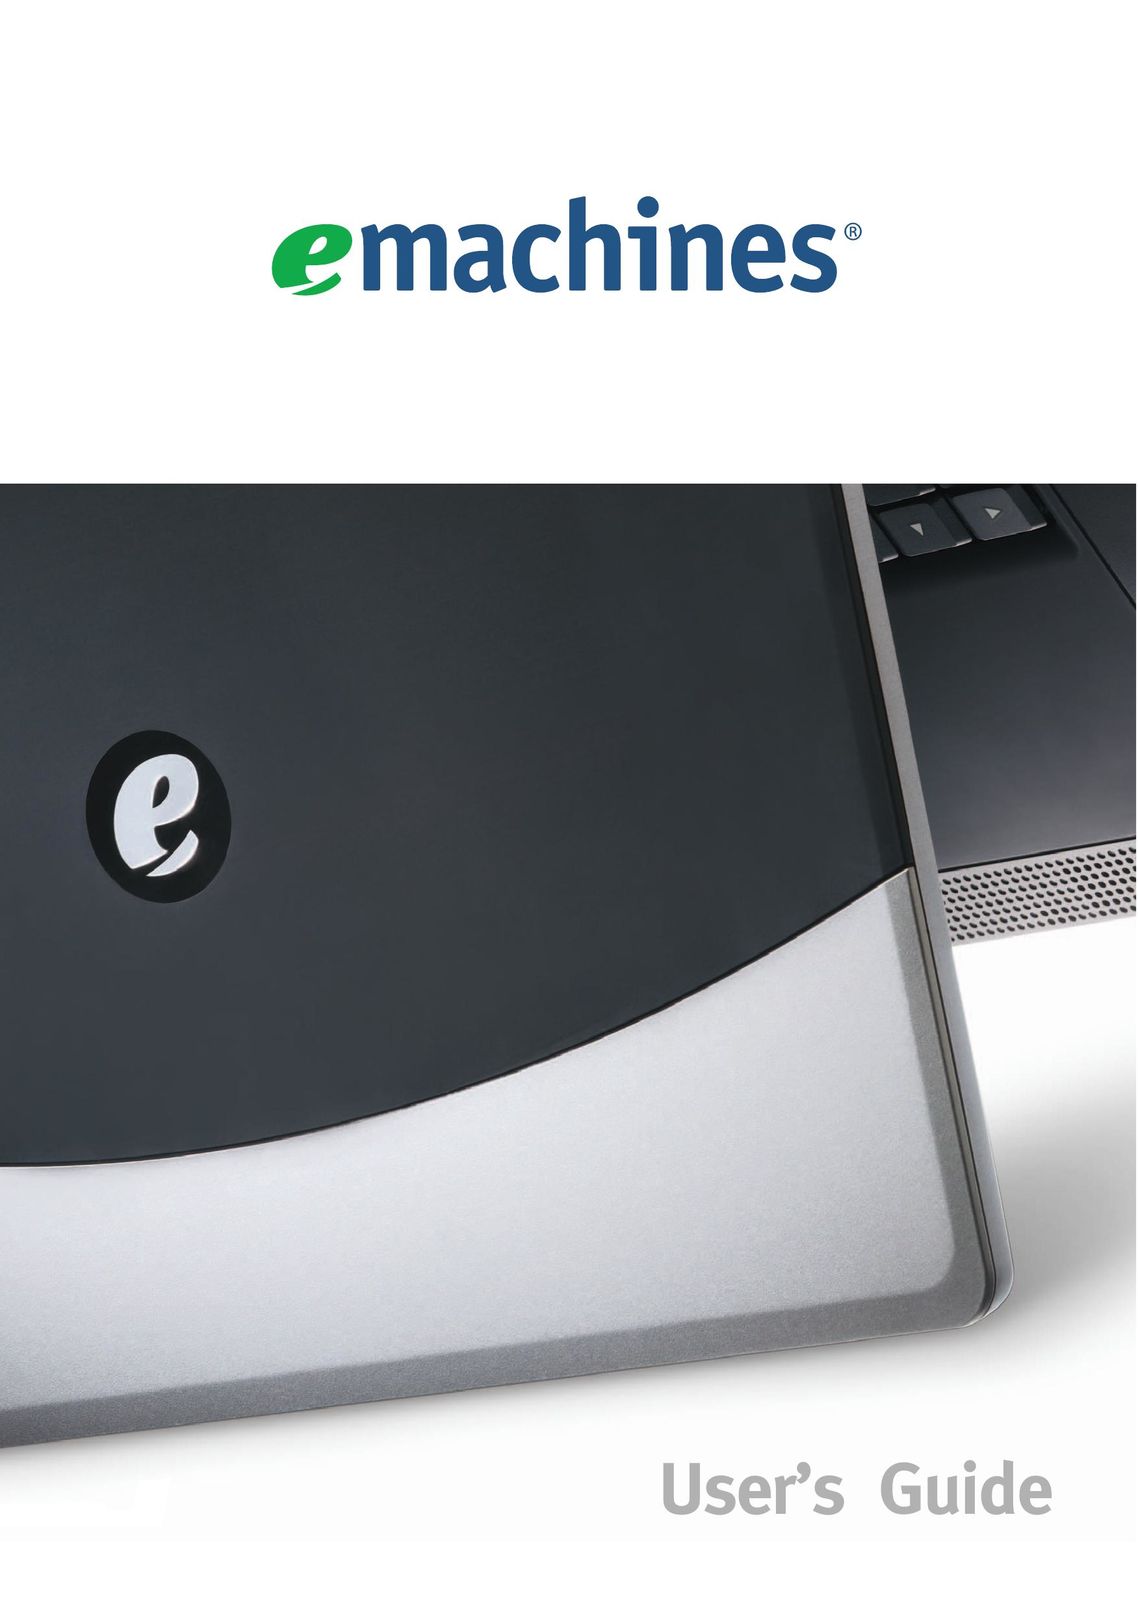 eMachines Notebooks Laptop User Manual